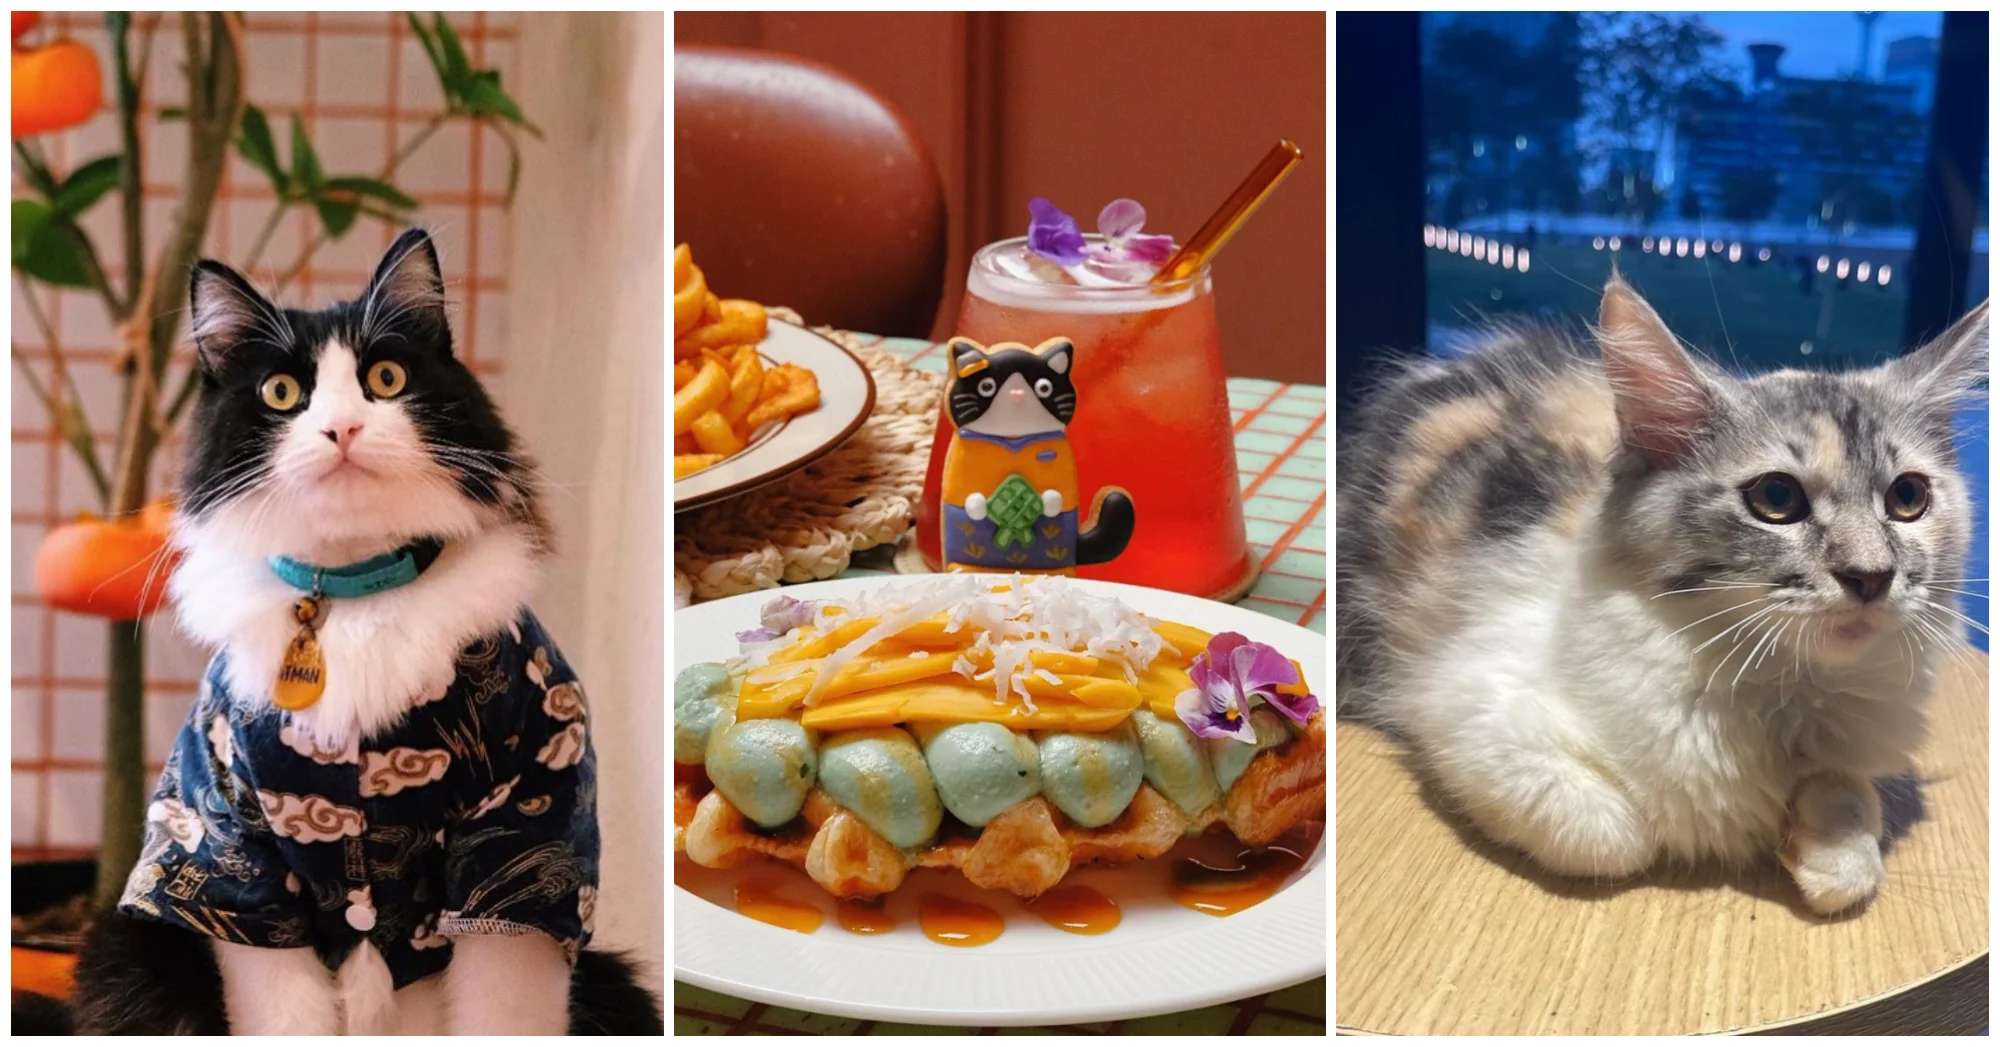 6 Cat Cafes In Kuala Lumpur For Your Next Purrfect Cafe Date (Pun Intended!)